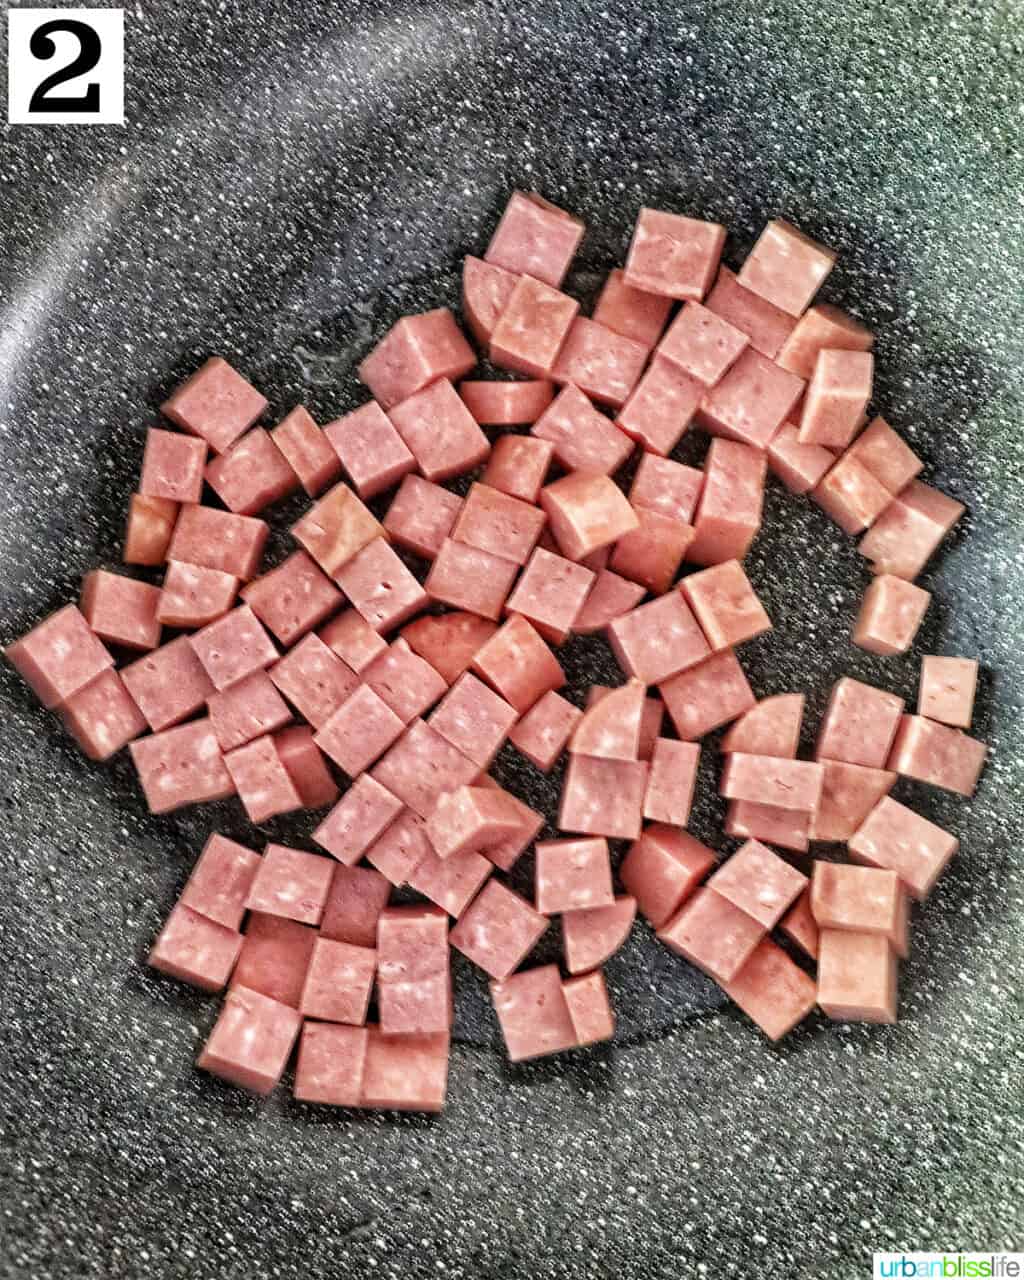 cooking cubed spam in a wok.